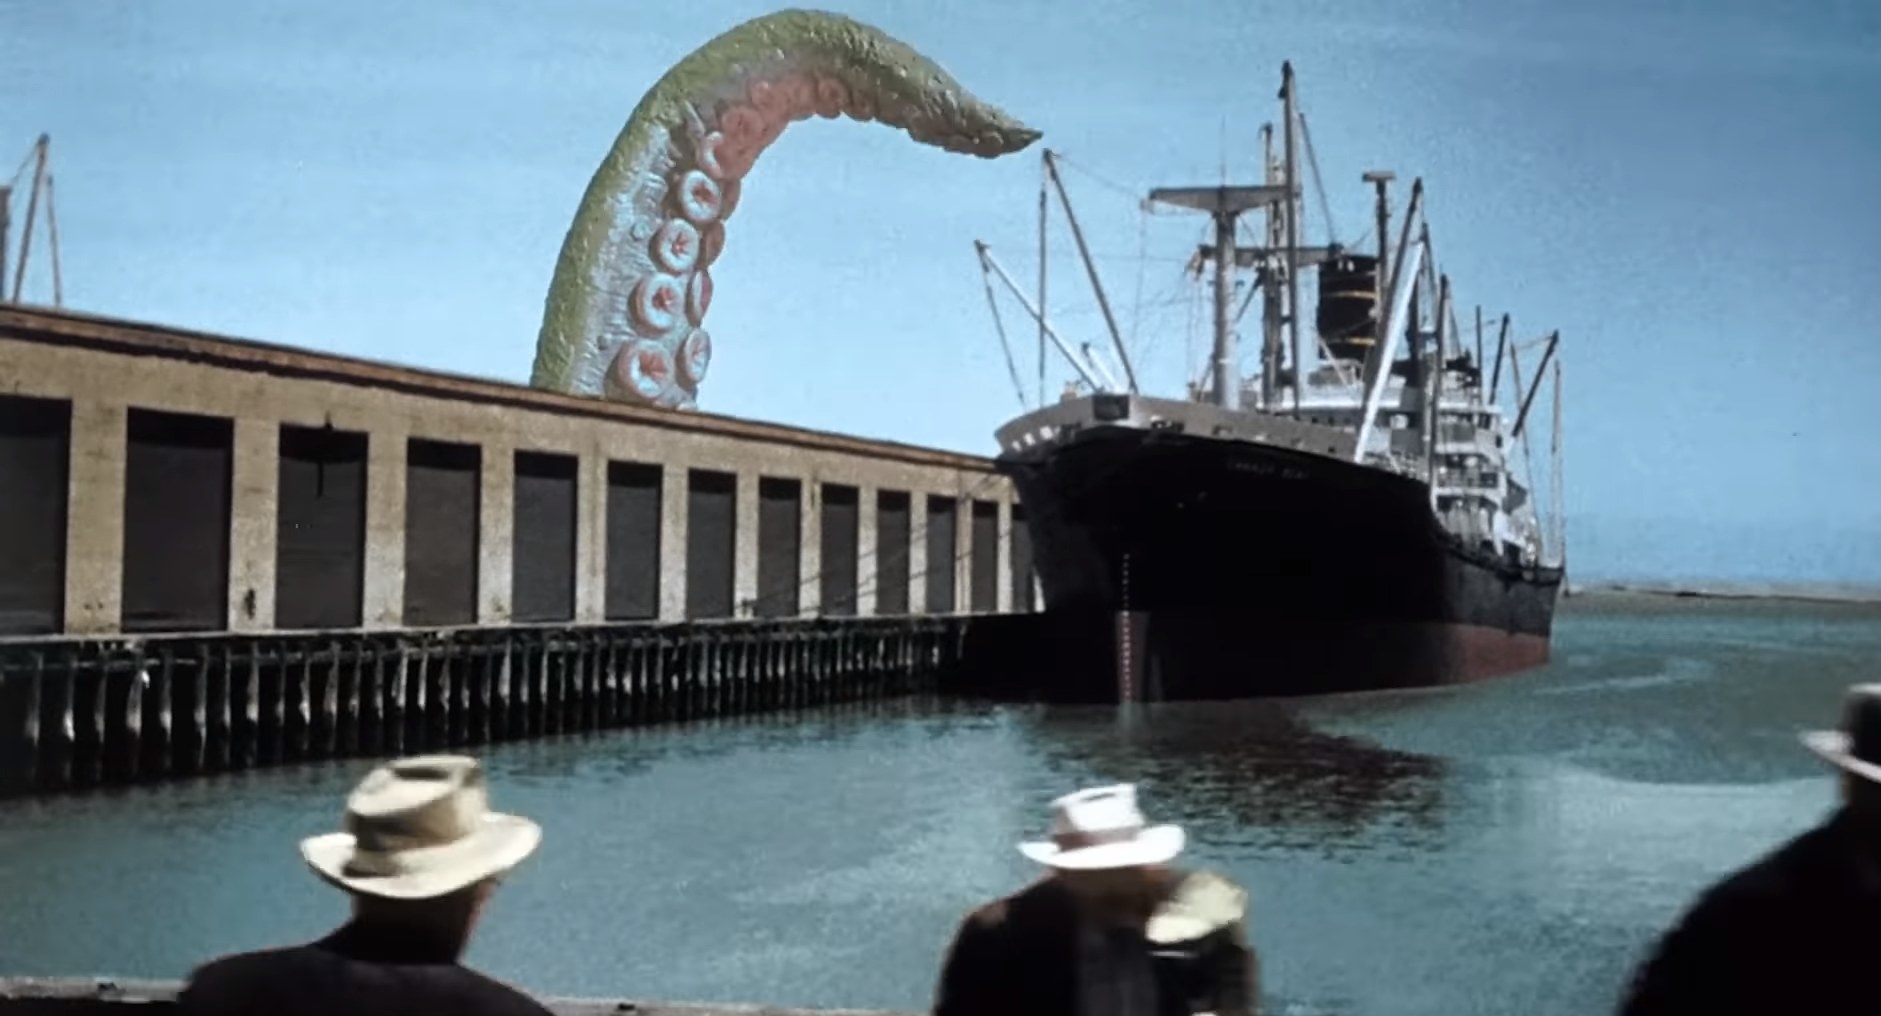 A massive octopus tentacle looms over a ship